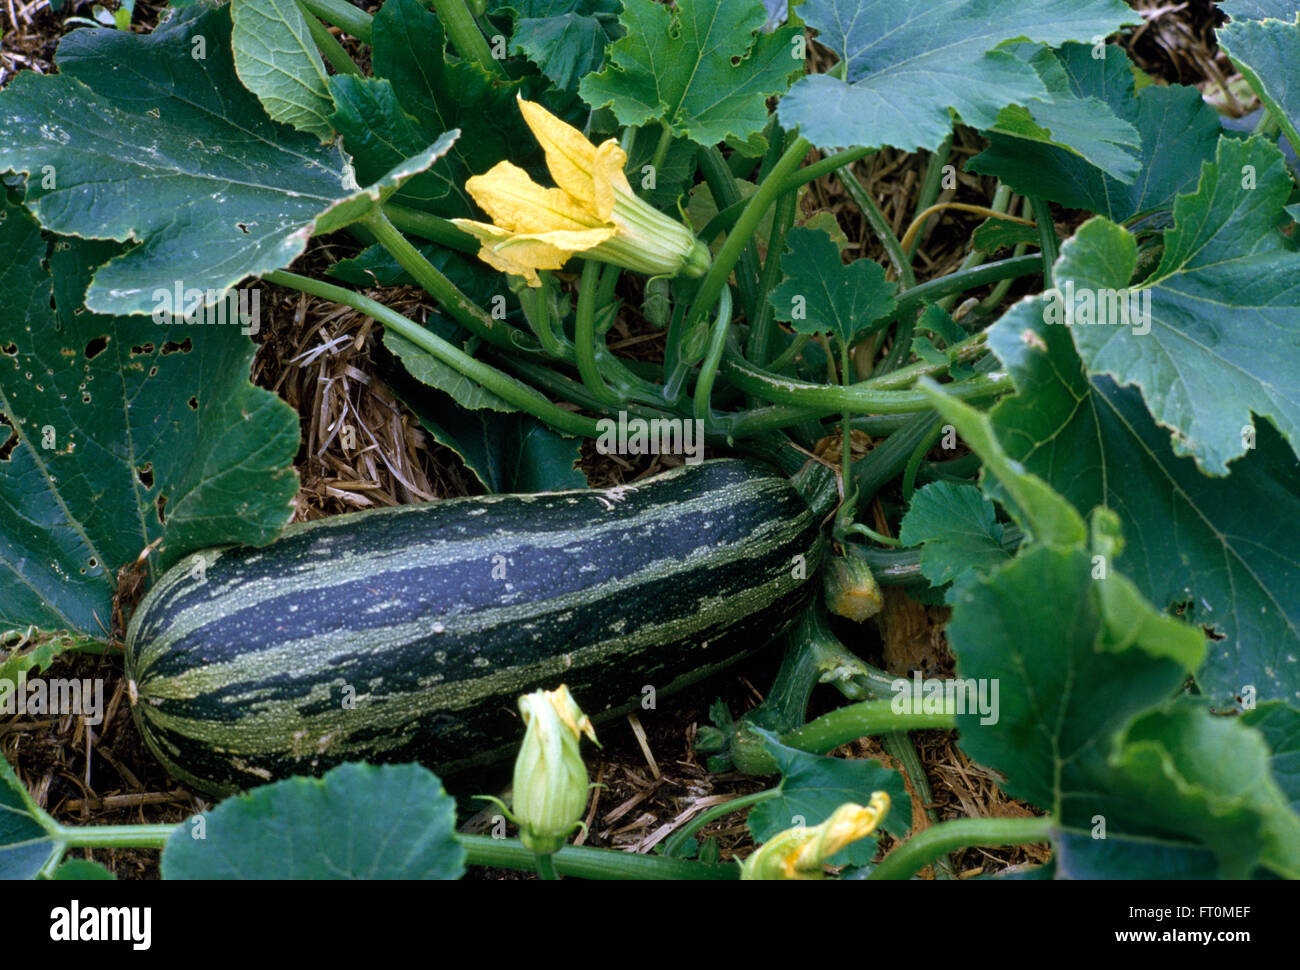 Close-up of a vegetable marrow with yellow flowers growing in a vegetable garden Stock Photo